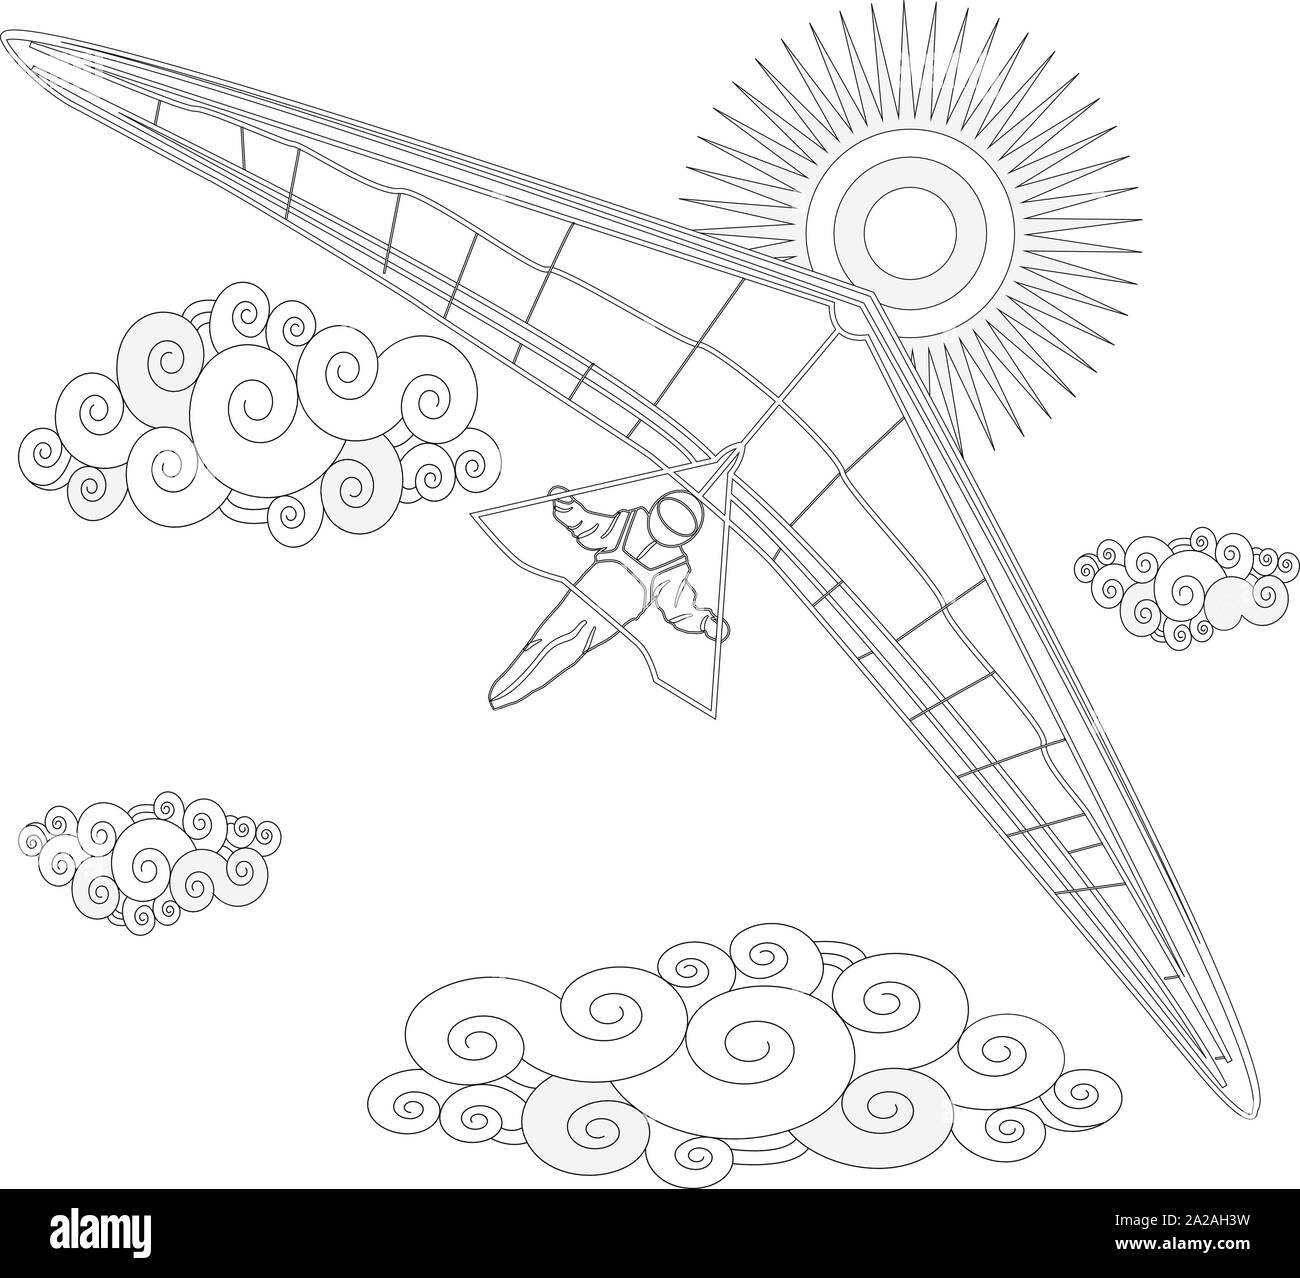 Glider. Coloring image of glider in the sky. Vector illustration. Stock Vector